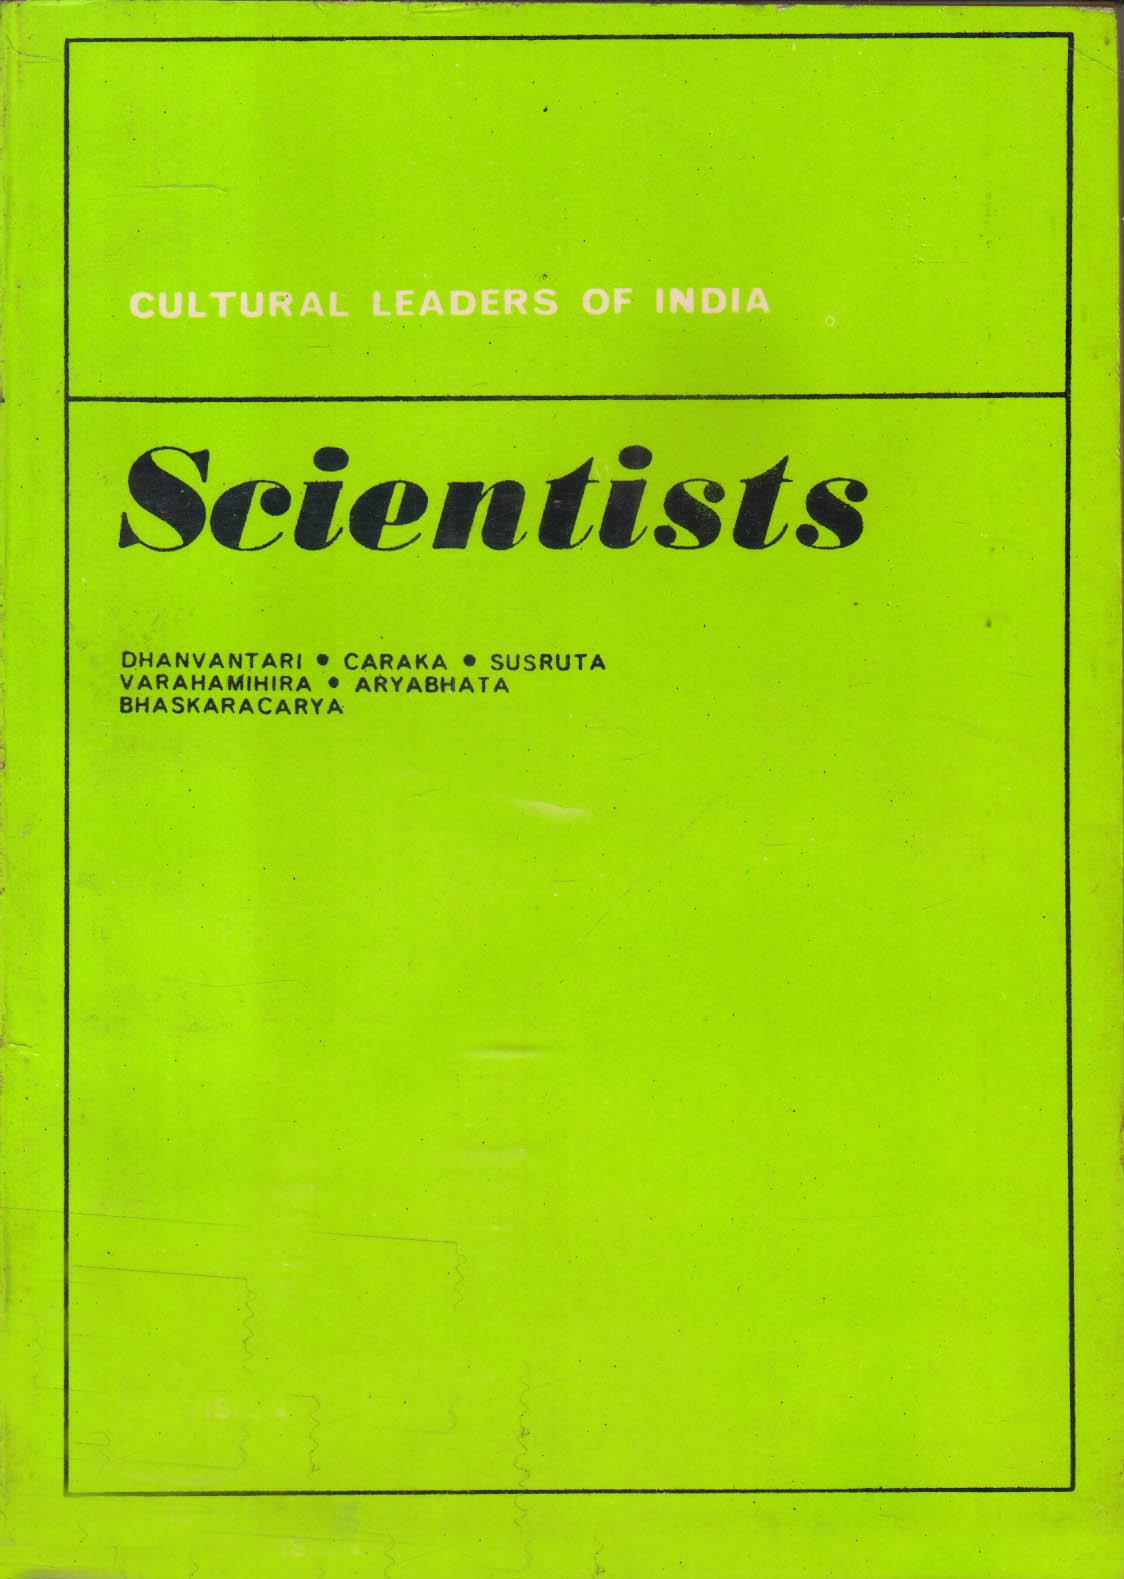 Cultural Leaders of India - Scientists